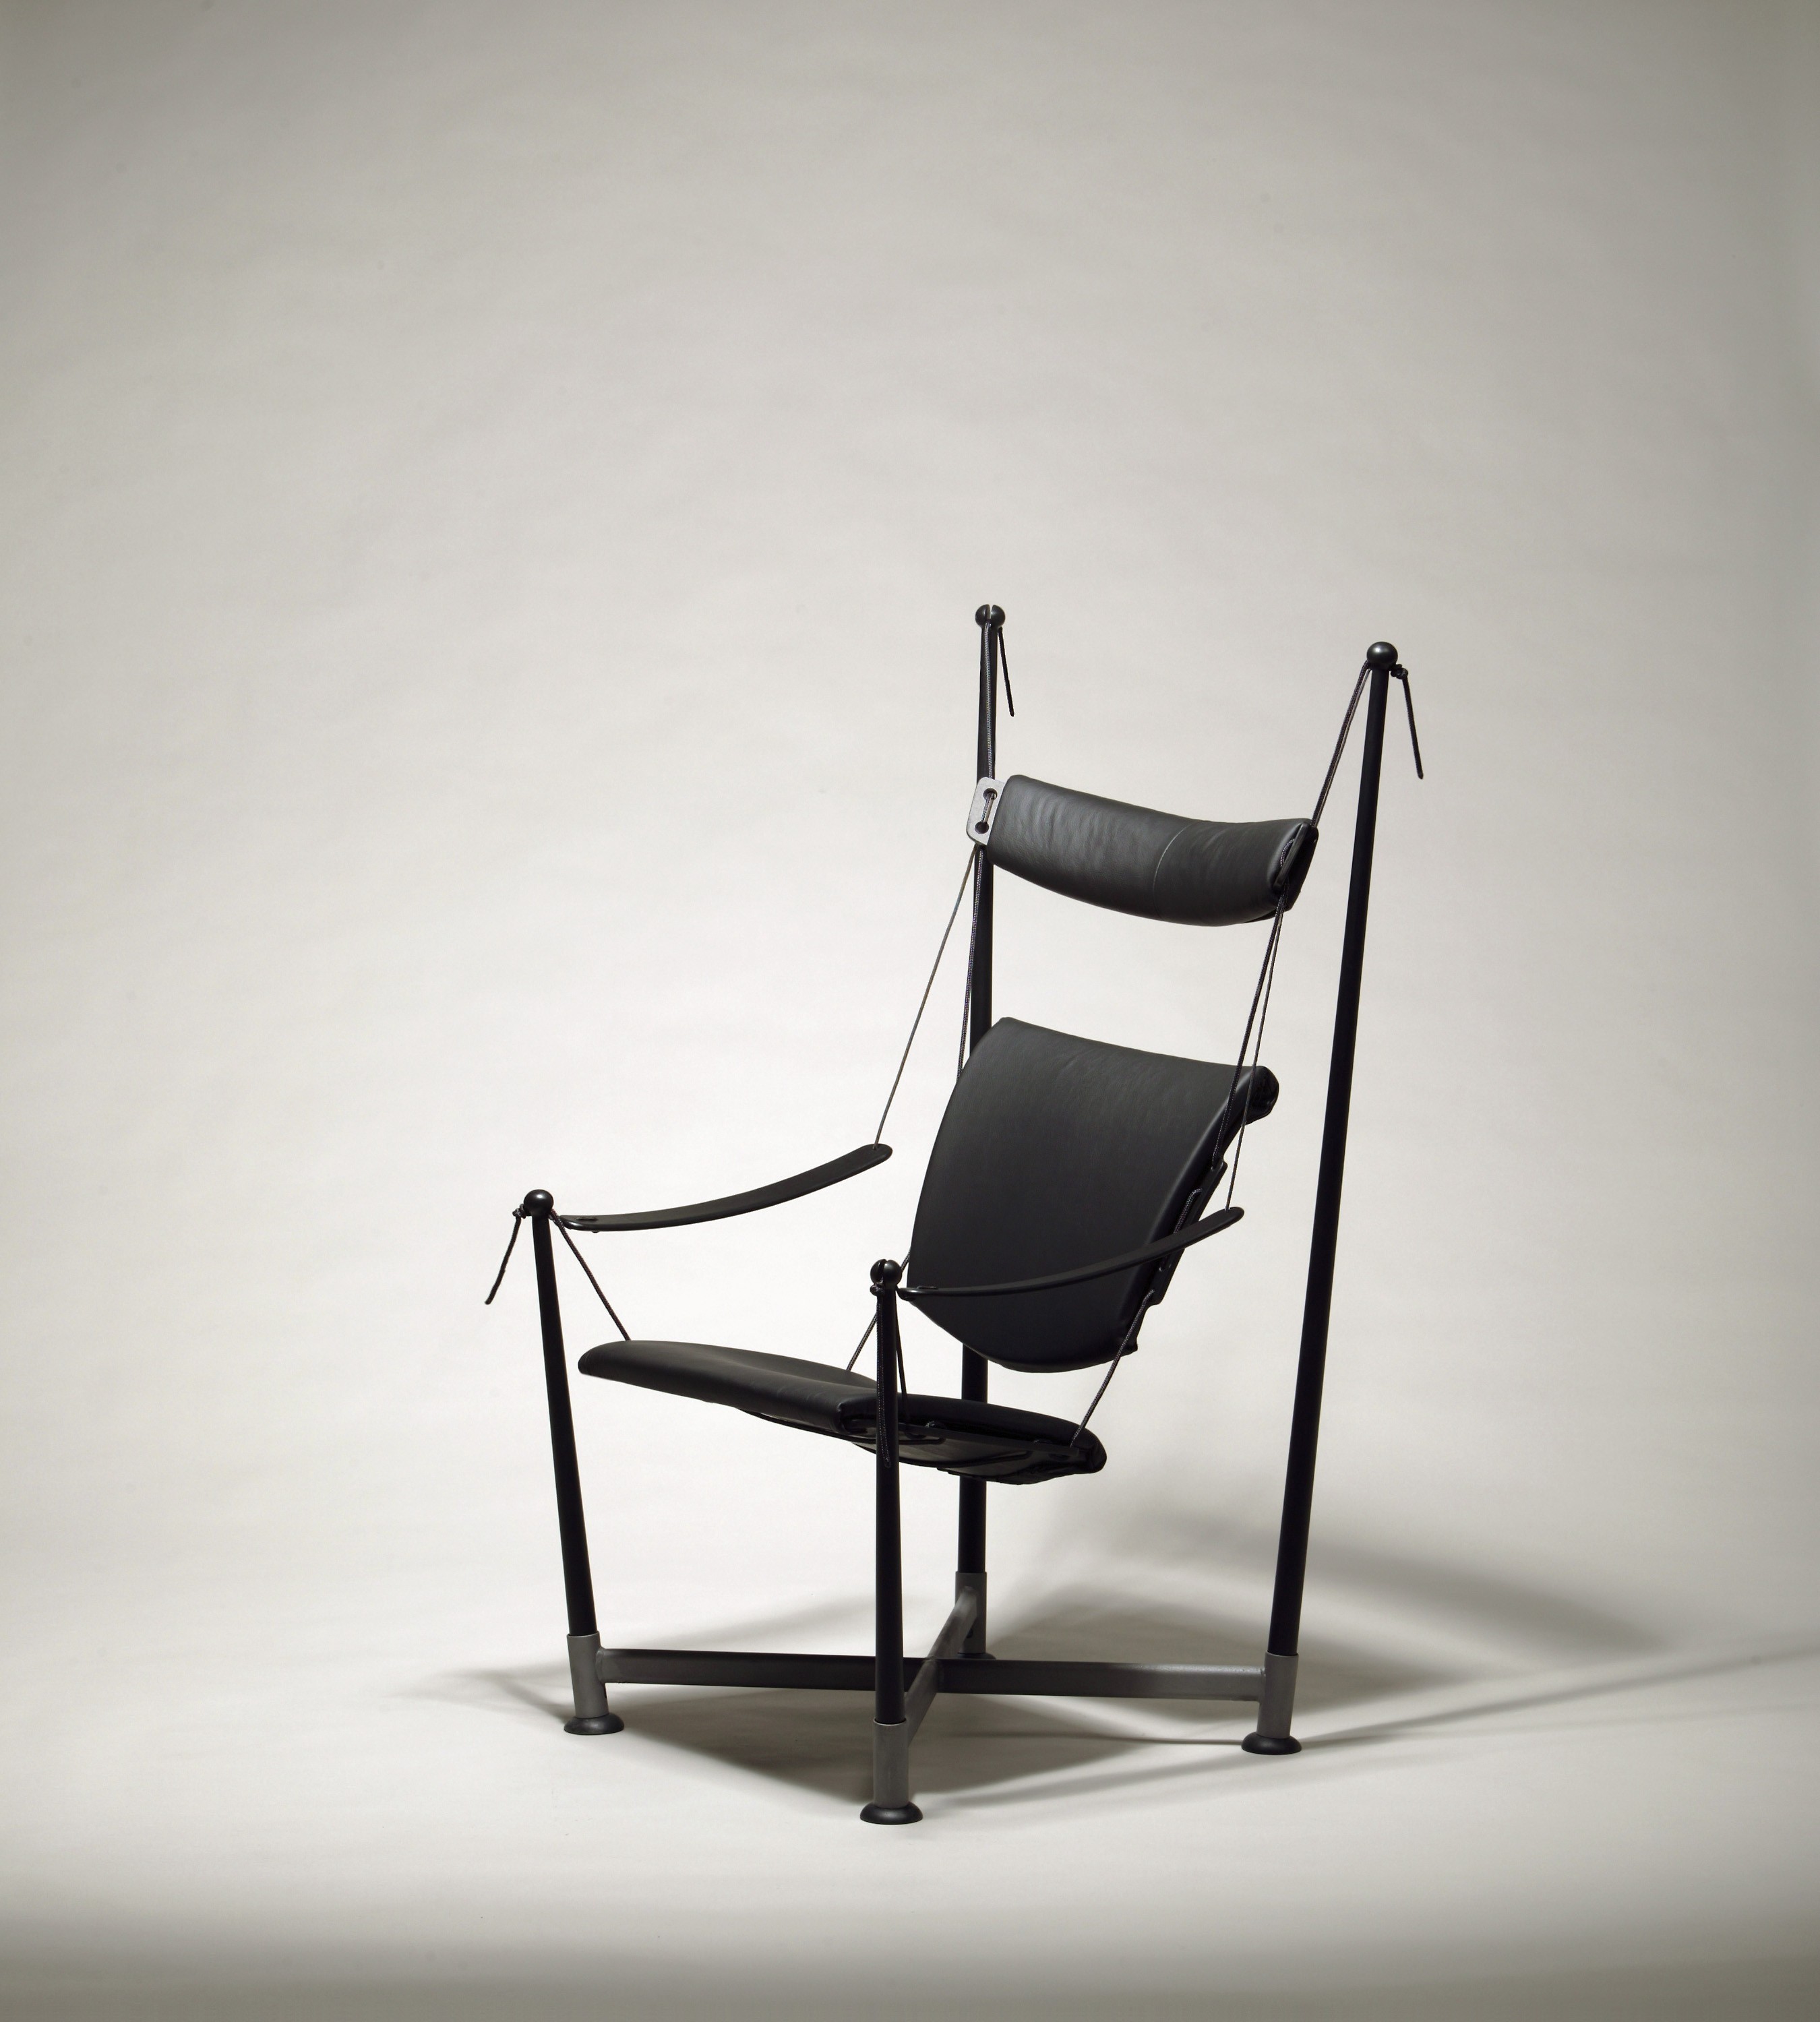 SEVERAL SEATS: The Chairs of Peter Opsvik